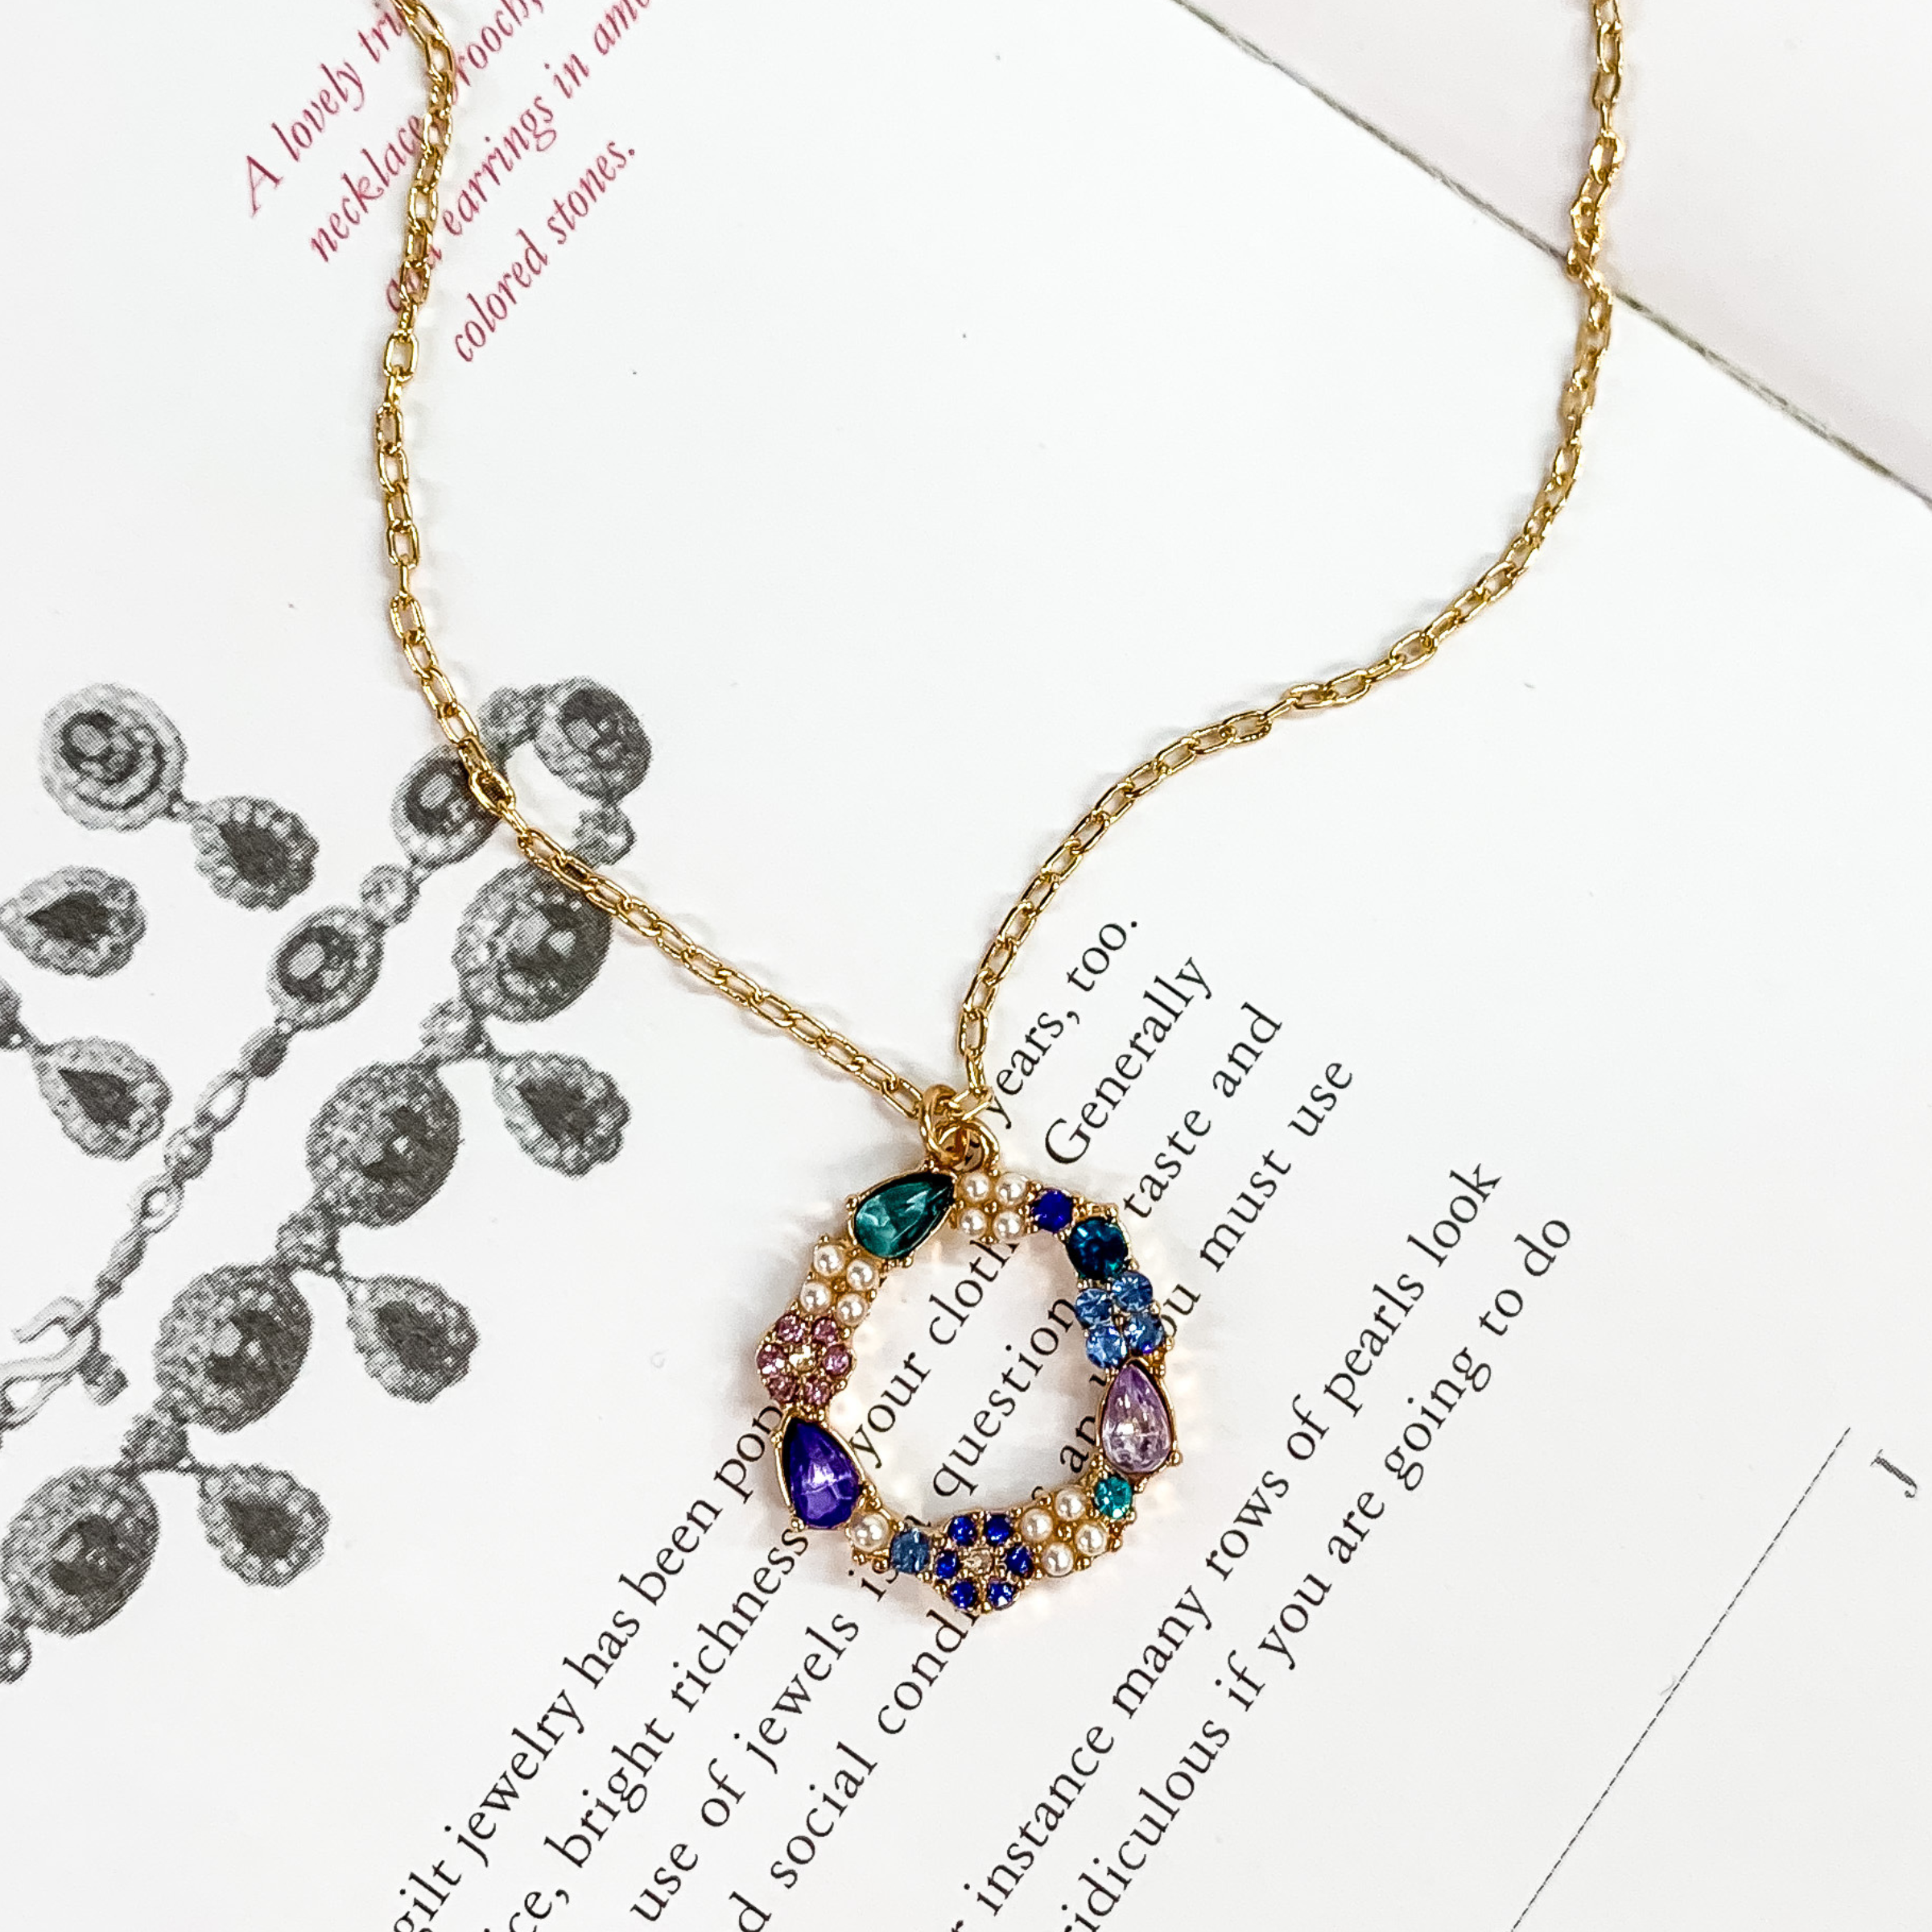 Gold Tone Chain Necklace and Open Circle Pendant with Purple and Blue Crystals - Giddy Up Glamour Boutique